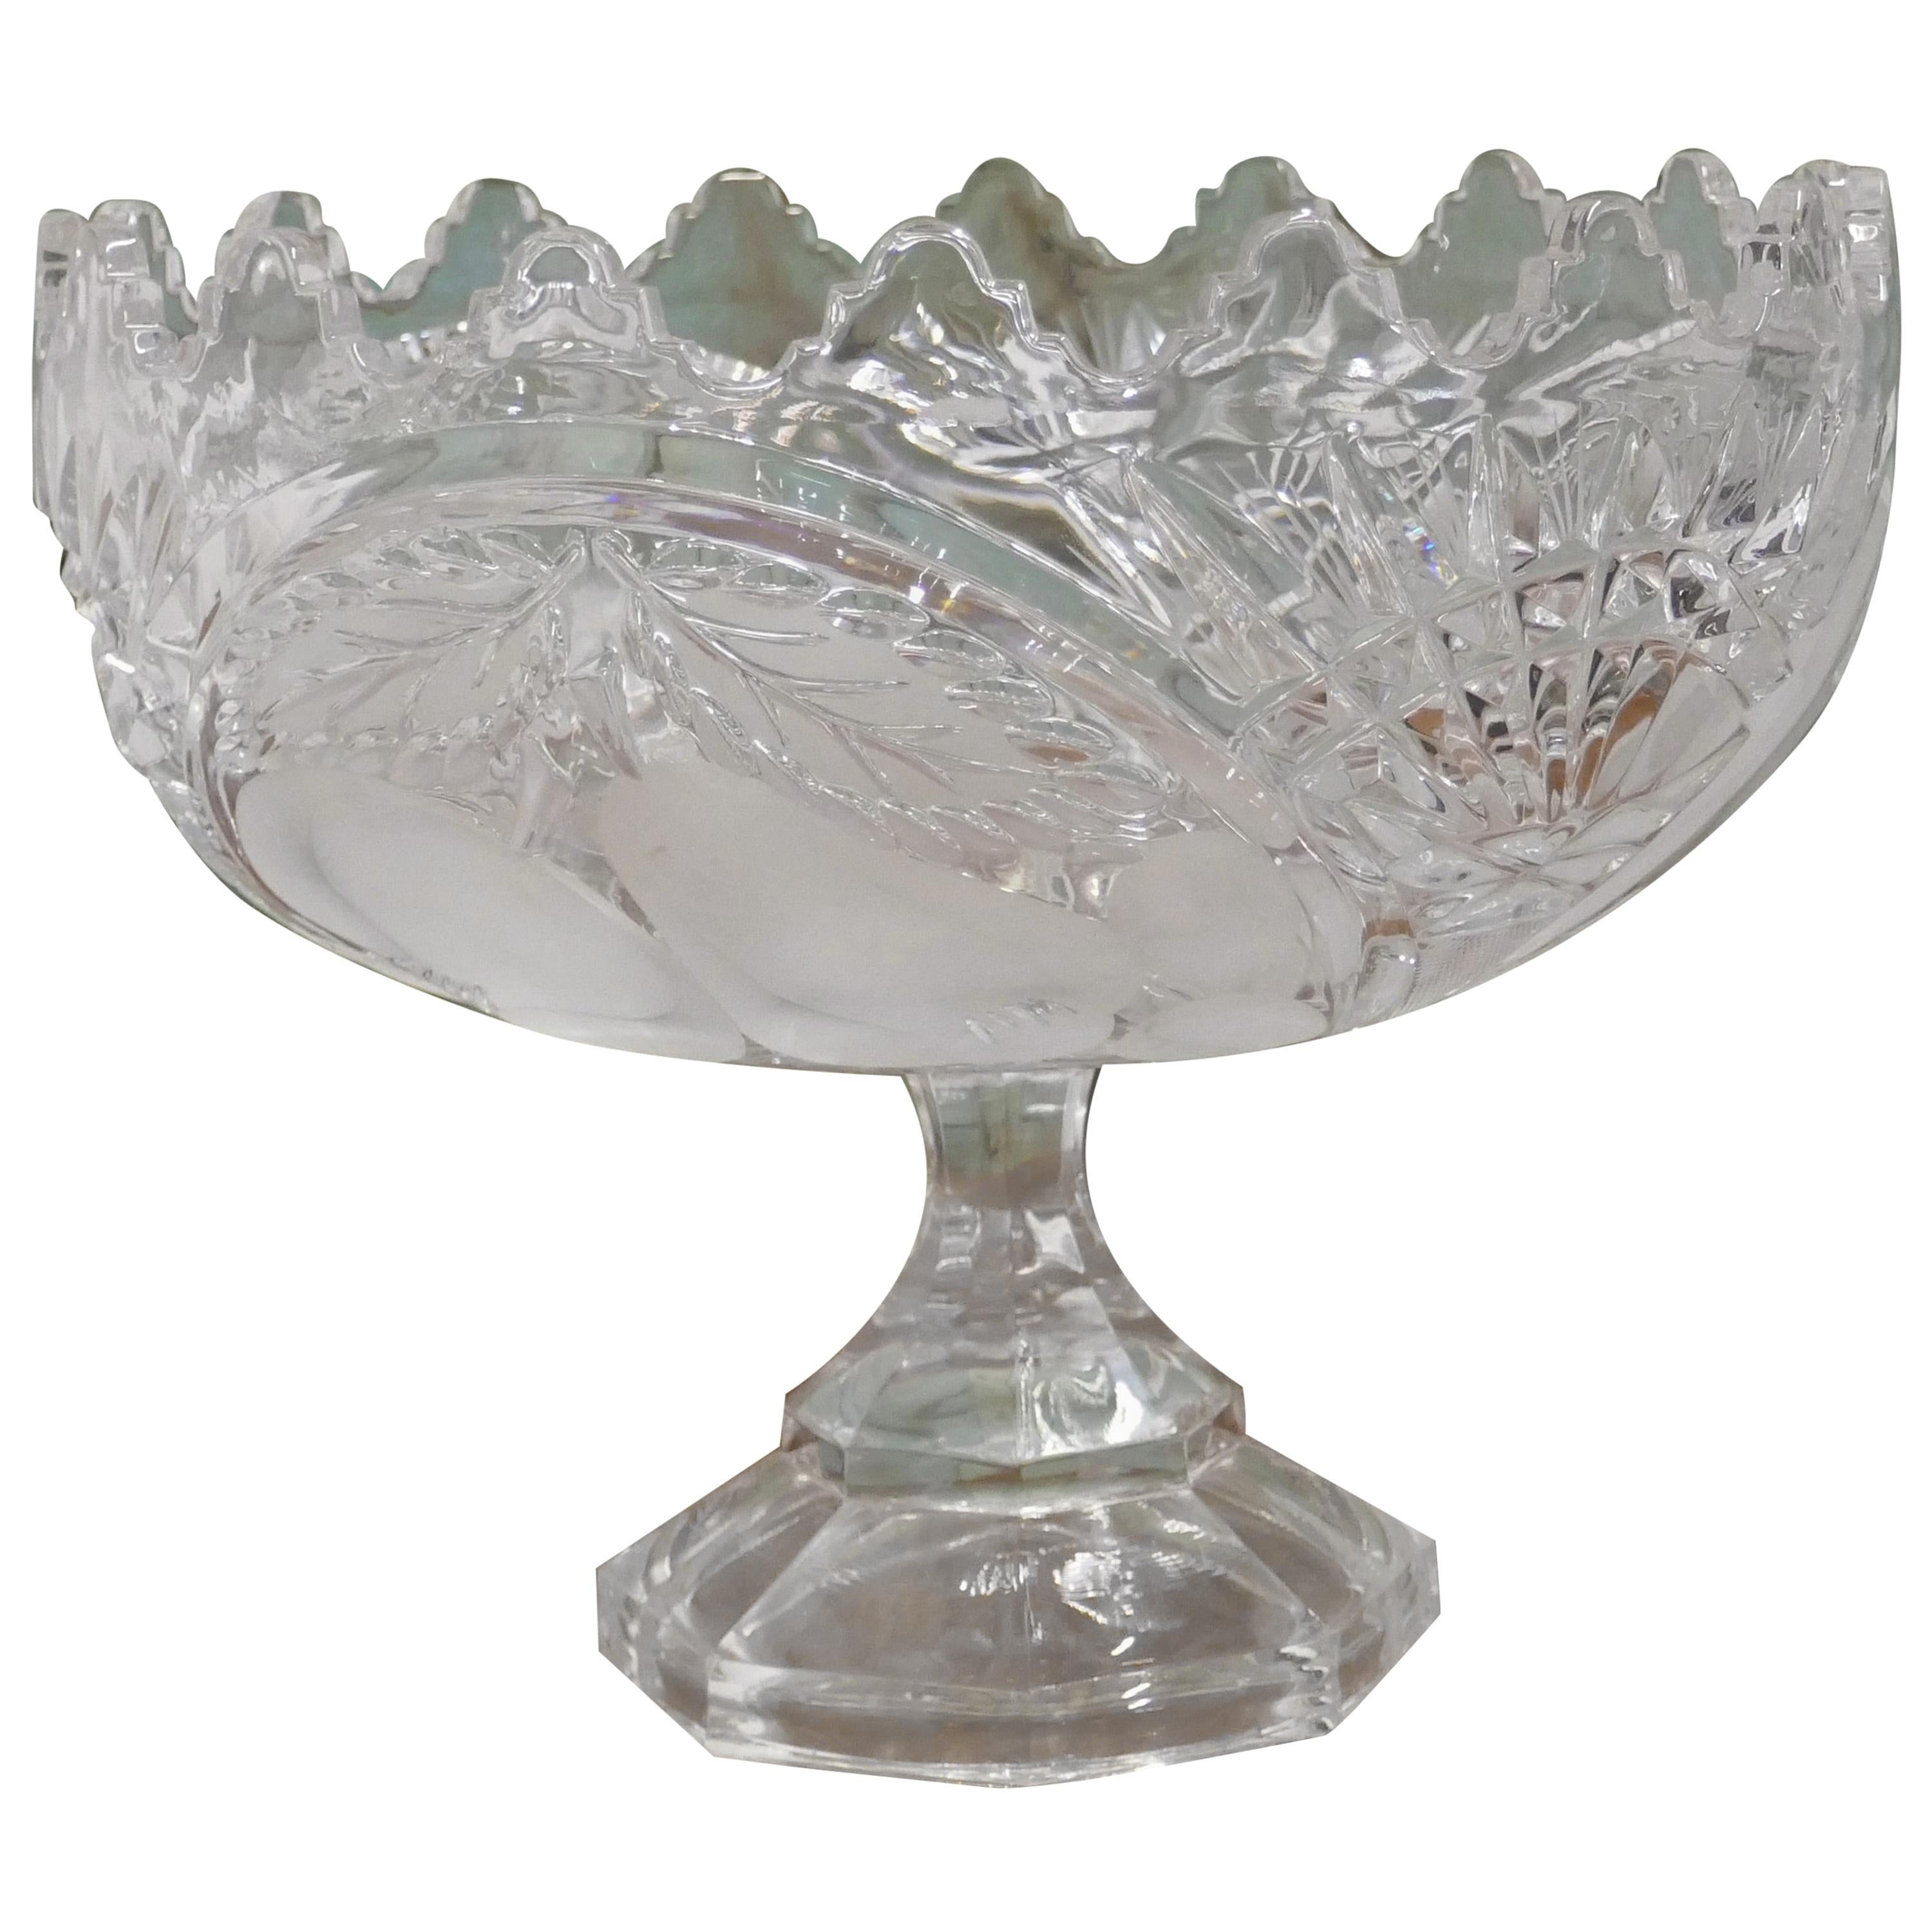 Large French Tazza Etched Cristal Pedestal Fruit Dish For Sale